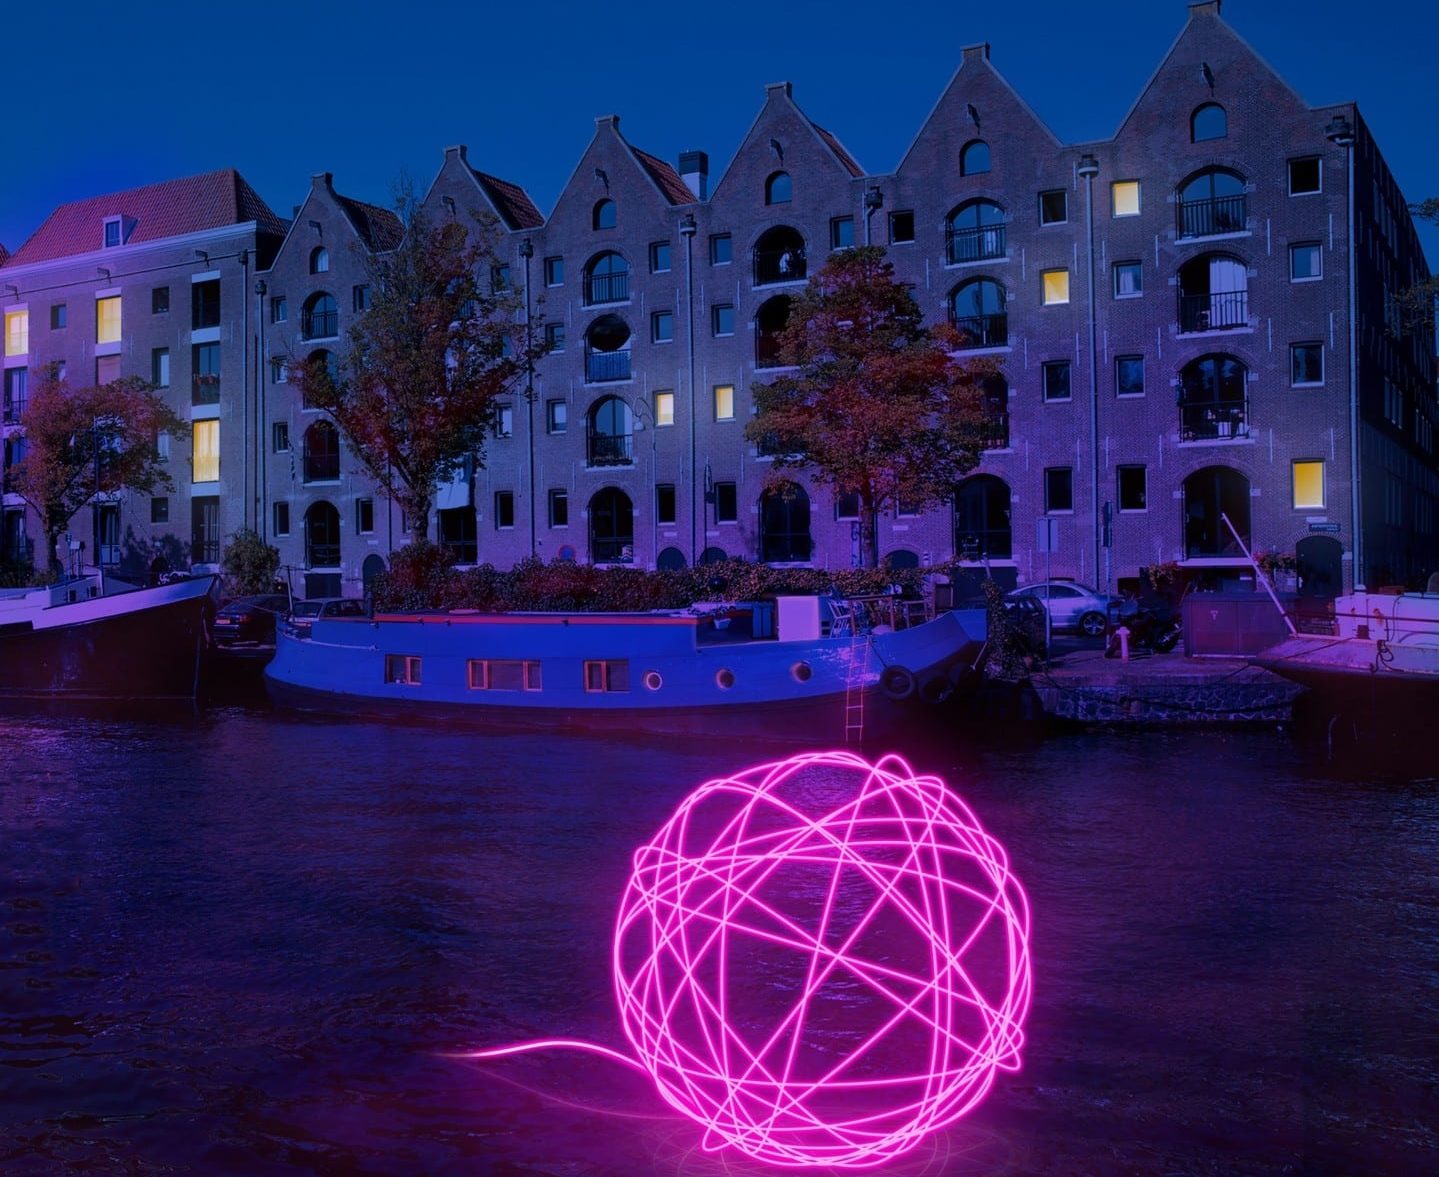 A bright pink, illuminated ball of strong sits afloat a canal at Amsterdam Light Festival.